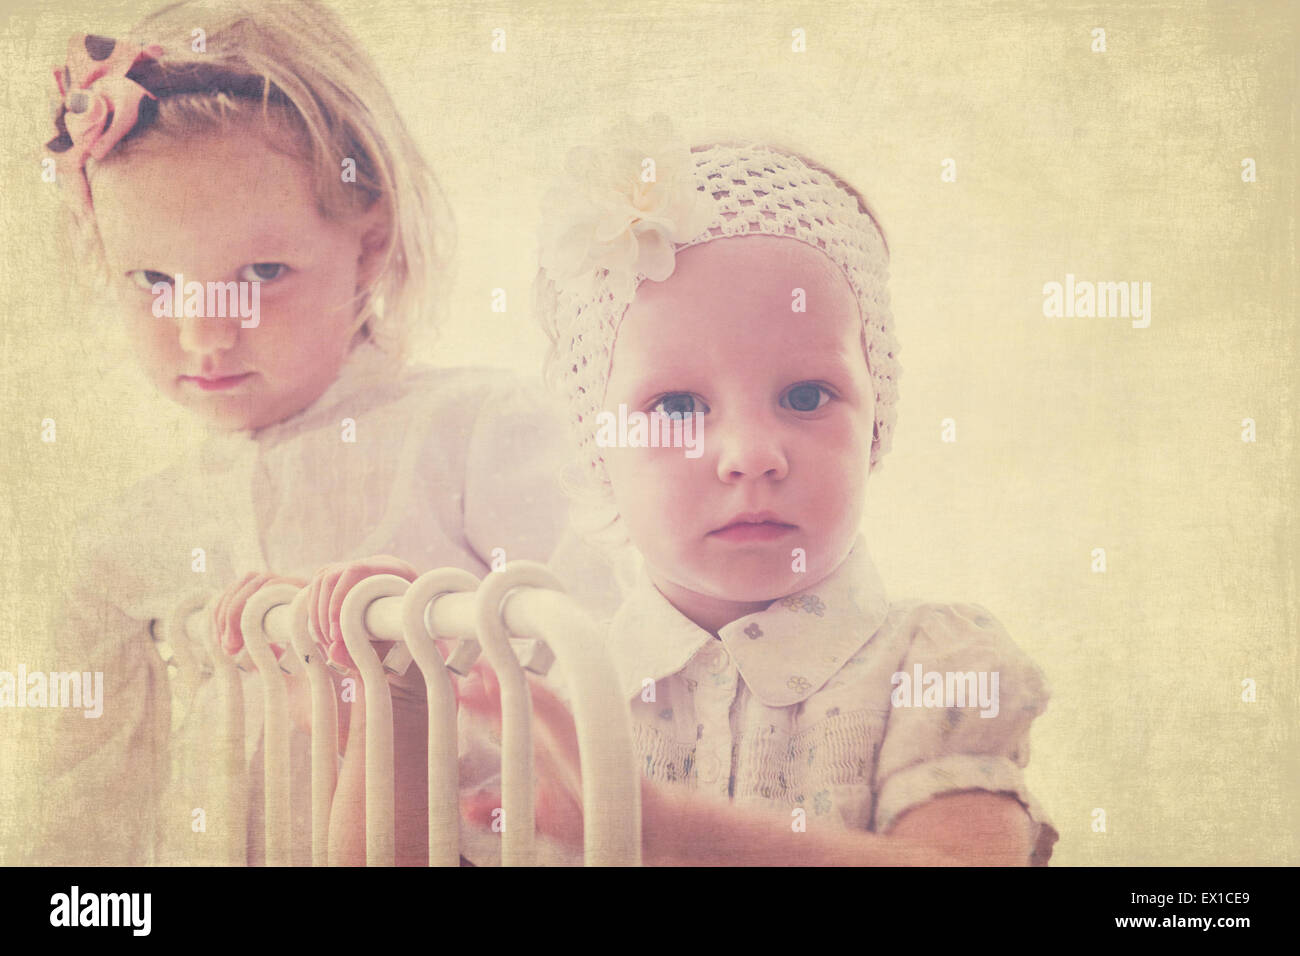 Art photo. Portrait of beautiful little girls (sisters)  in vintage style. The image is tinted, blurring and selective focus. Stock Photo